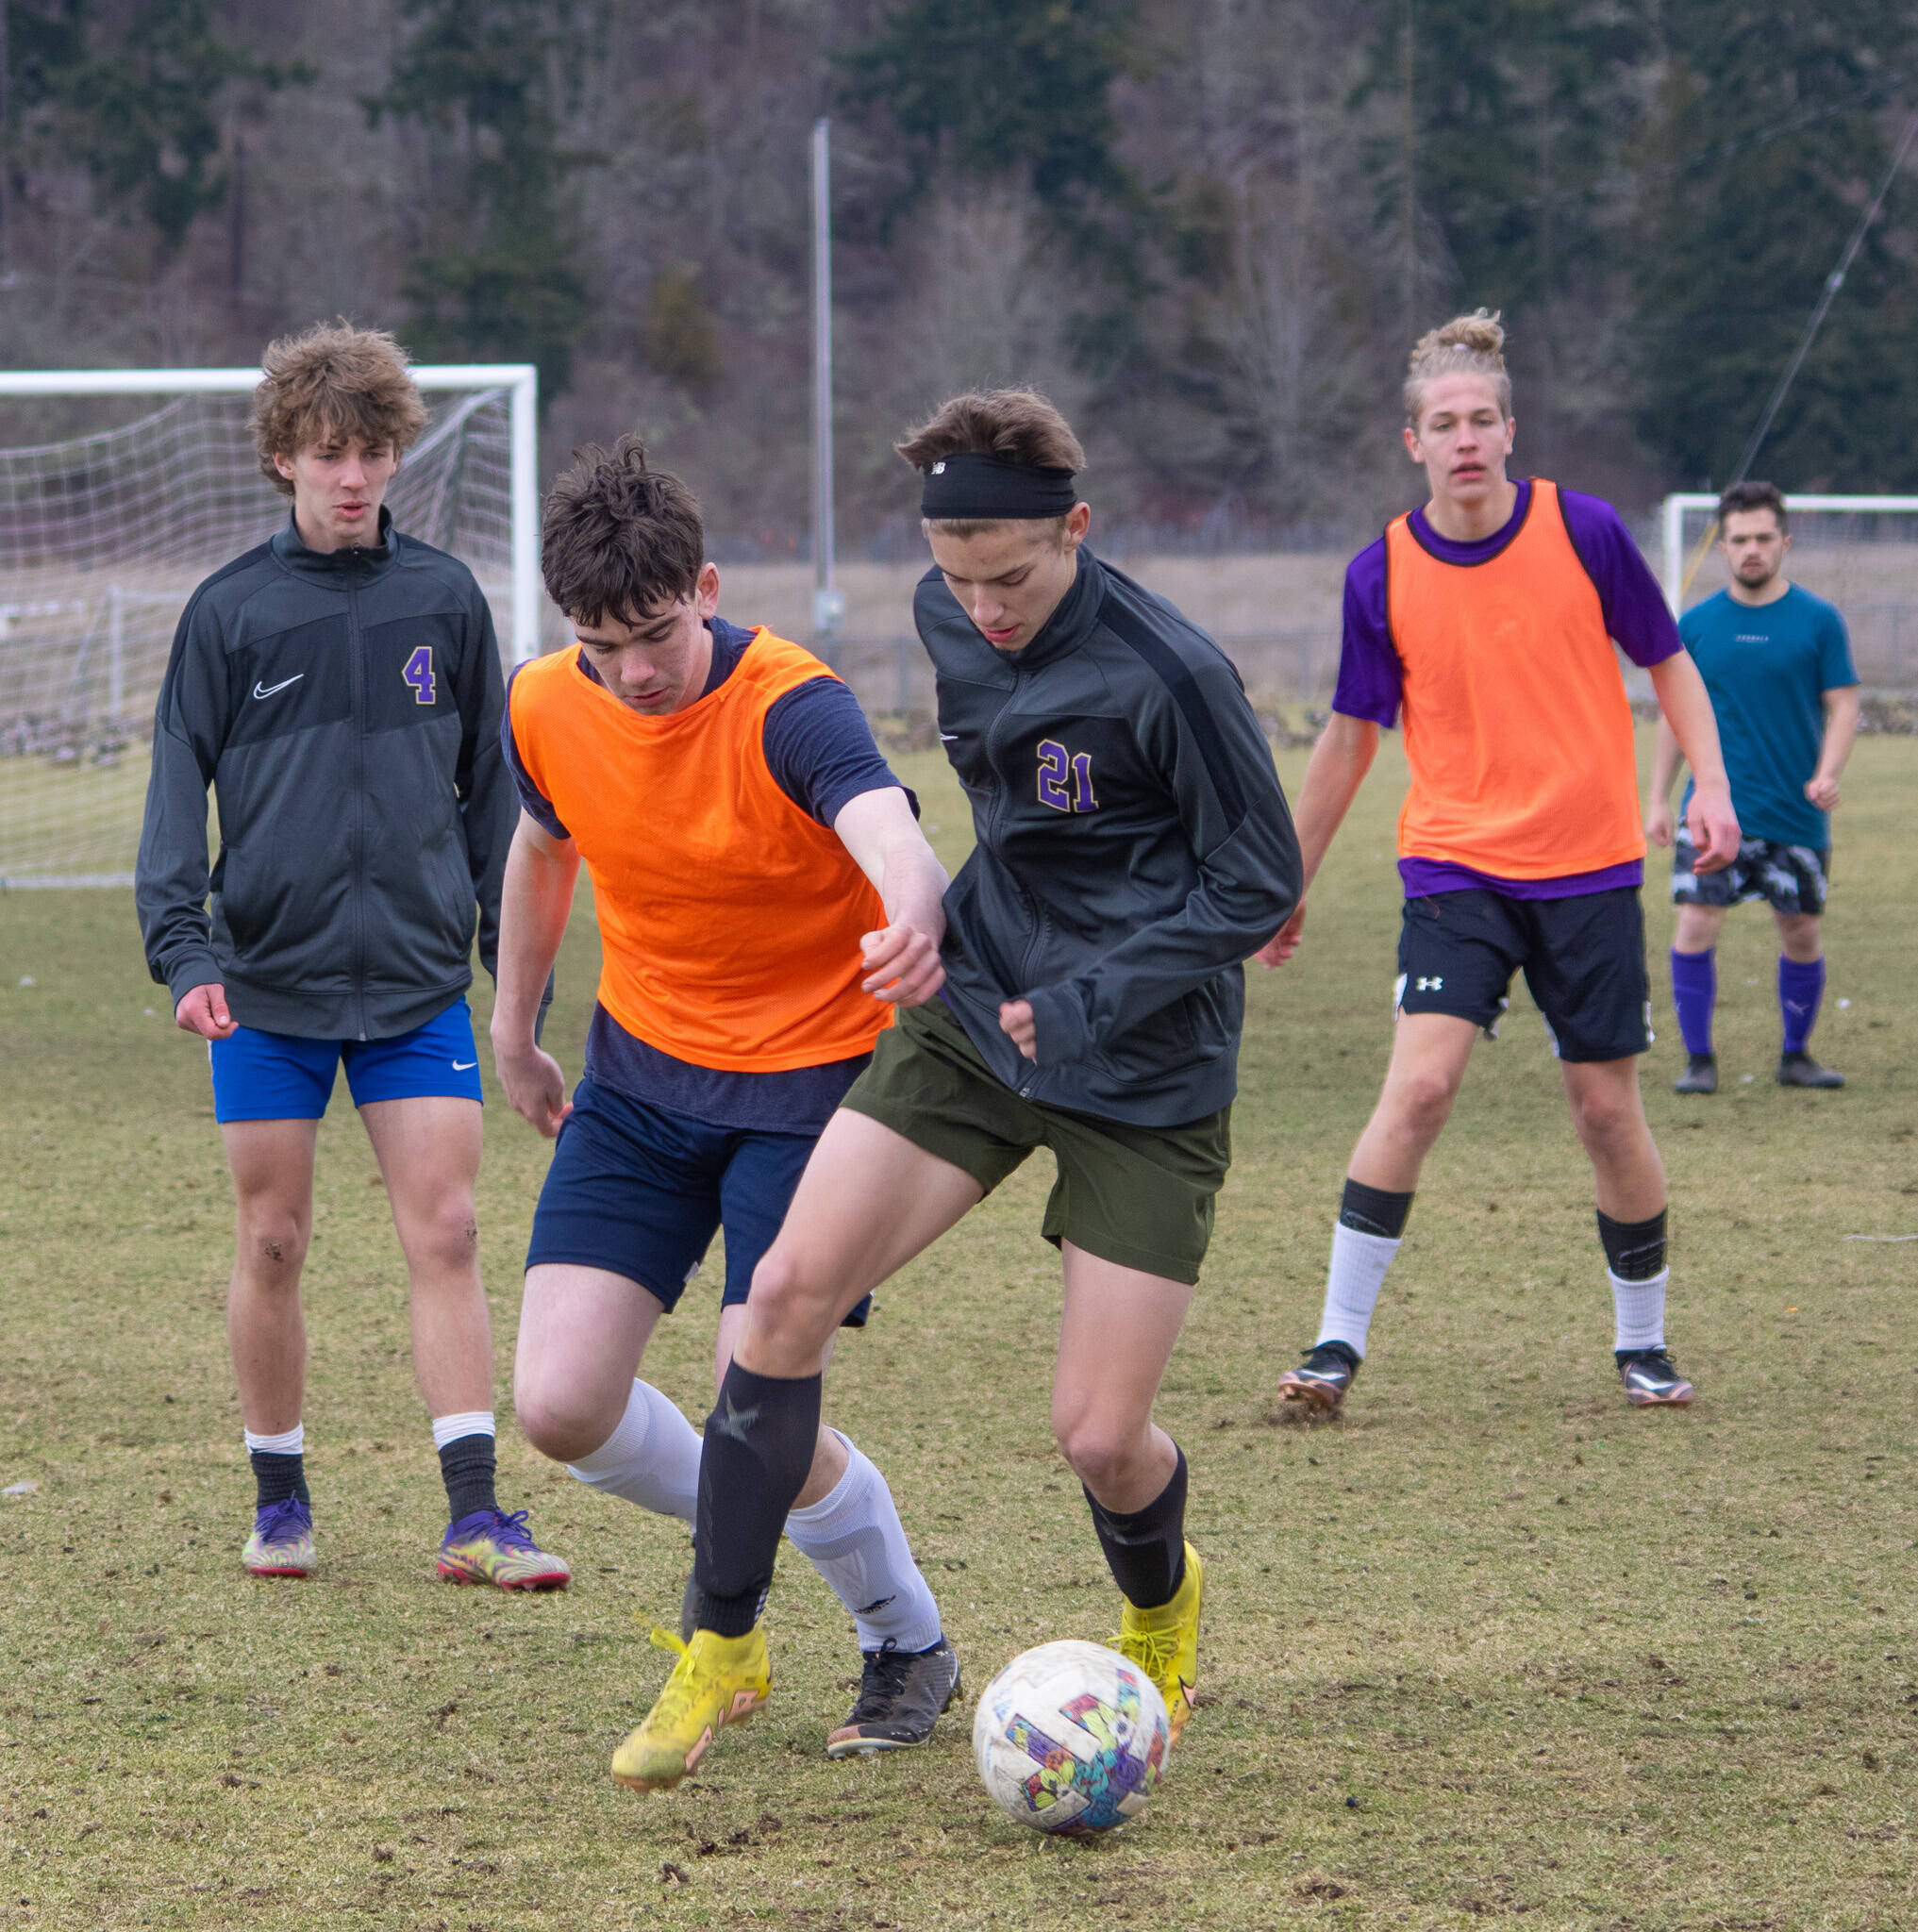 Sequim Gazette photo by Emily Matthiessen / Preston Kurtze holds the ball with Colin Feik immediately behind, as the varsity soccer team practices at the Albert Haller Playfields at Carrie Blake Community Park.